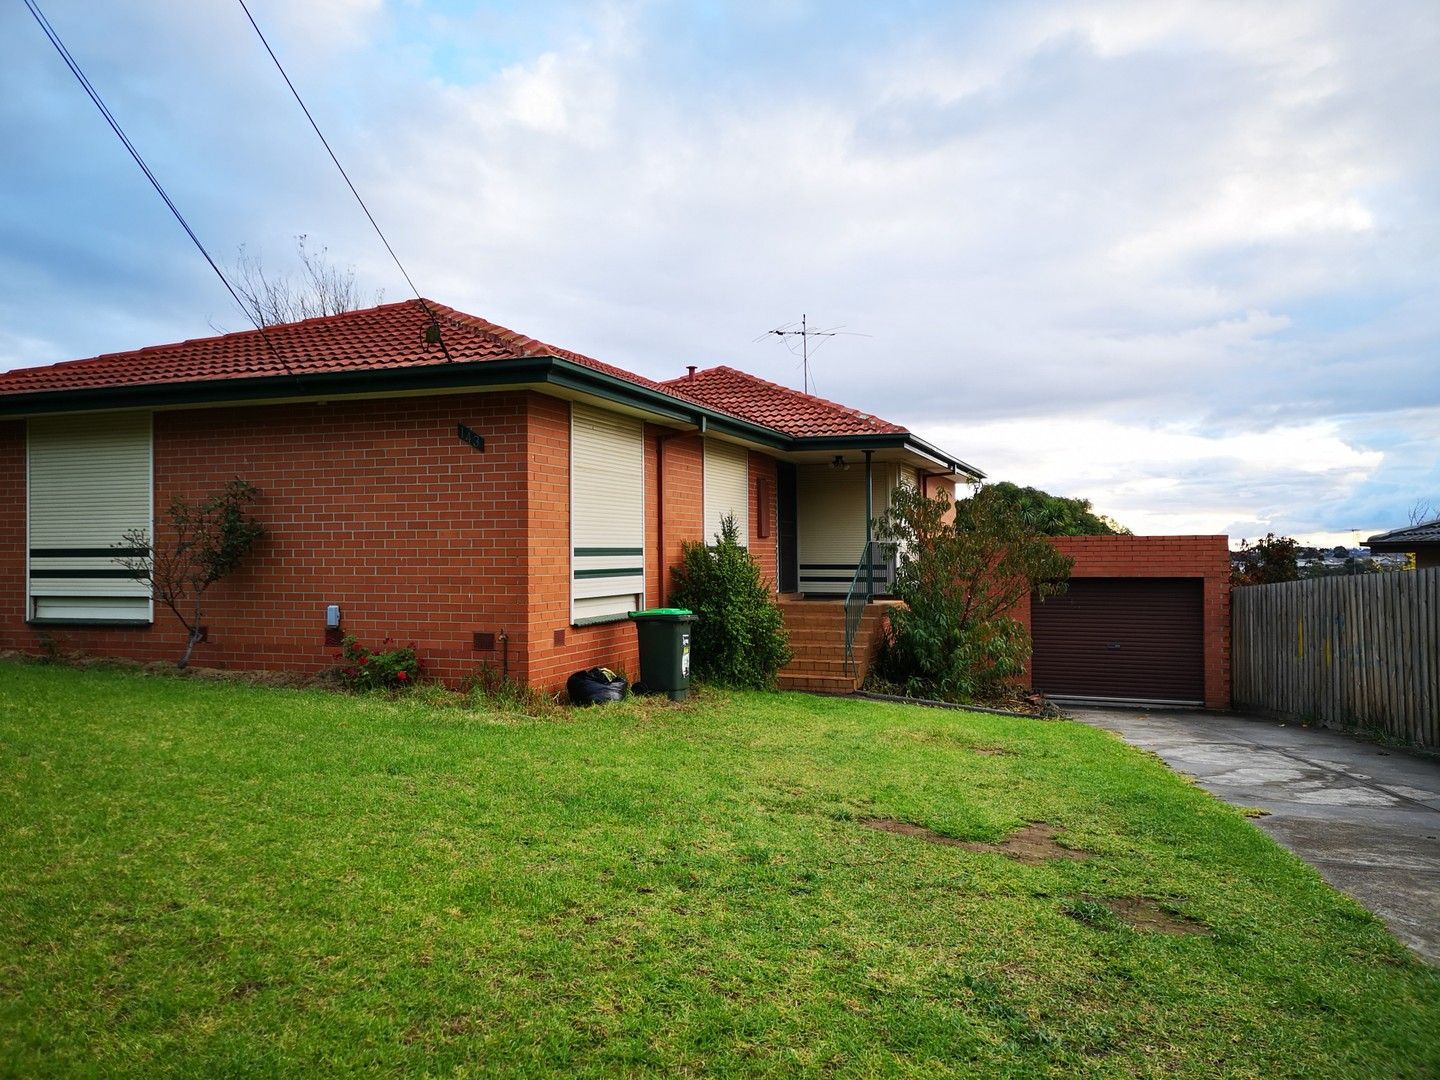 3 bedrooms House in 143 Riggall Street BROADMEADOWS VIC, 3047